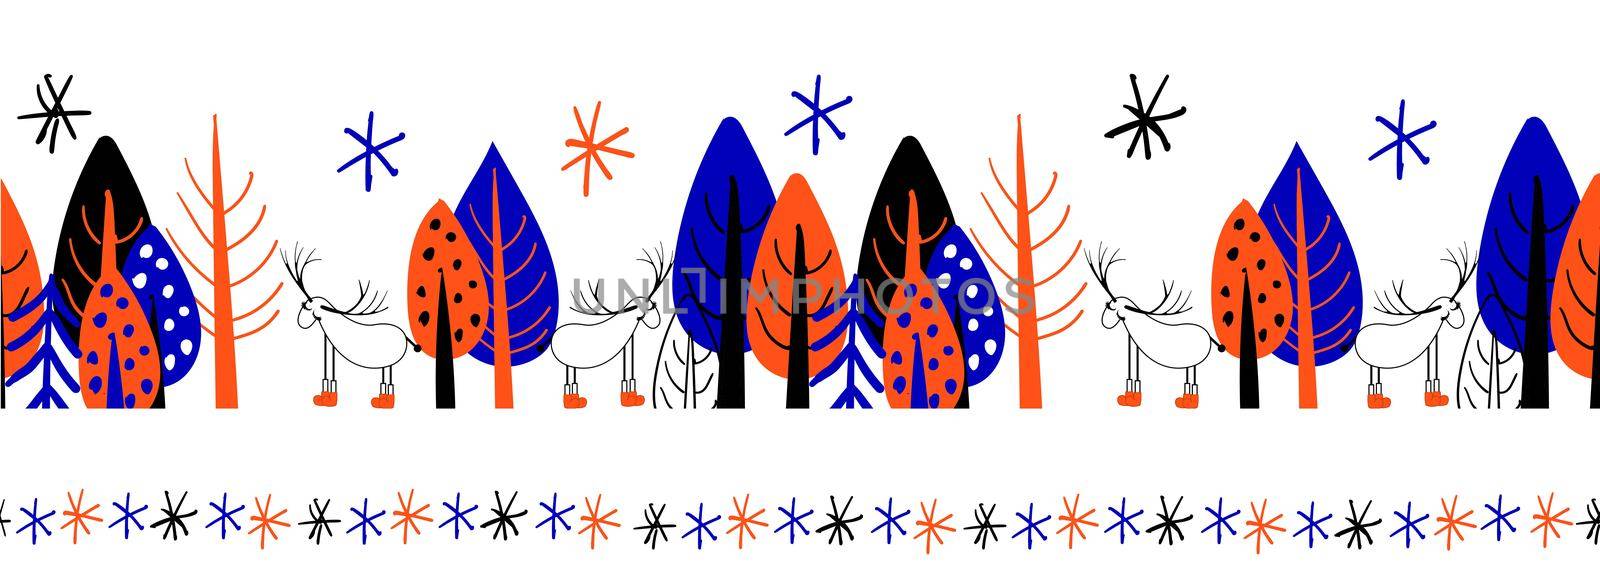 Seamless border, repeating ribbon. Blue and orange colors. Cute cartoon trees on a white background.